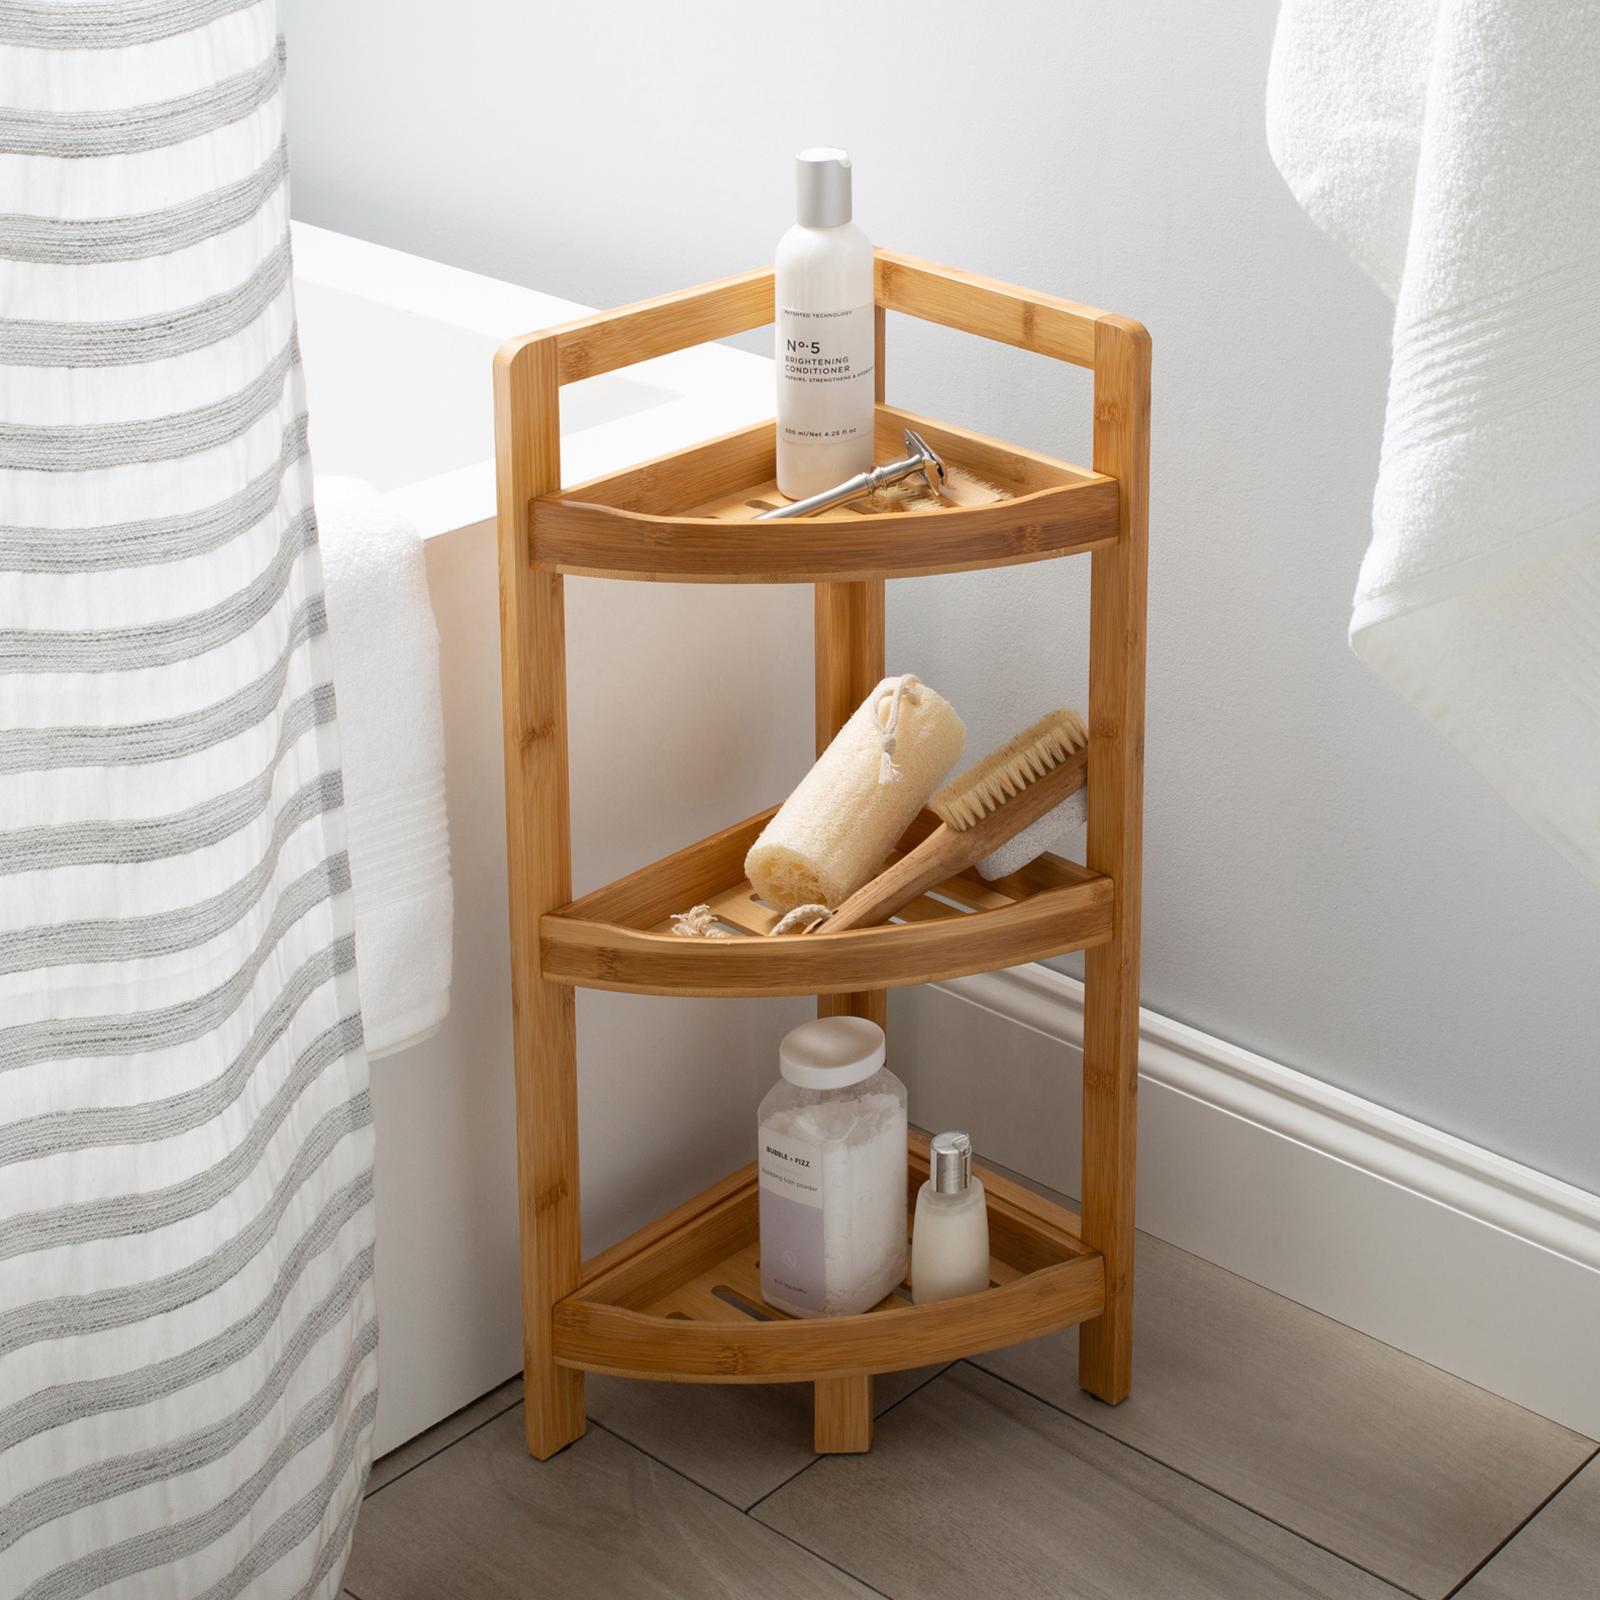 White 24.62 in. W Bathroom Space Saver, 3 Tiers, Over The Toilet Storage Cabinet, Better Homes & Gardens